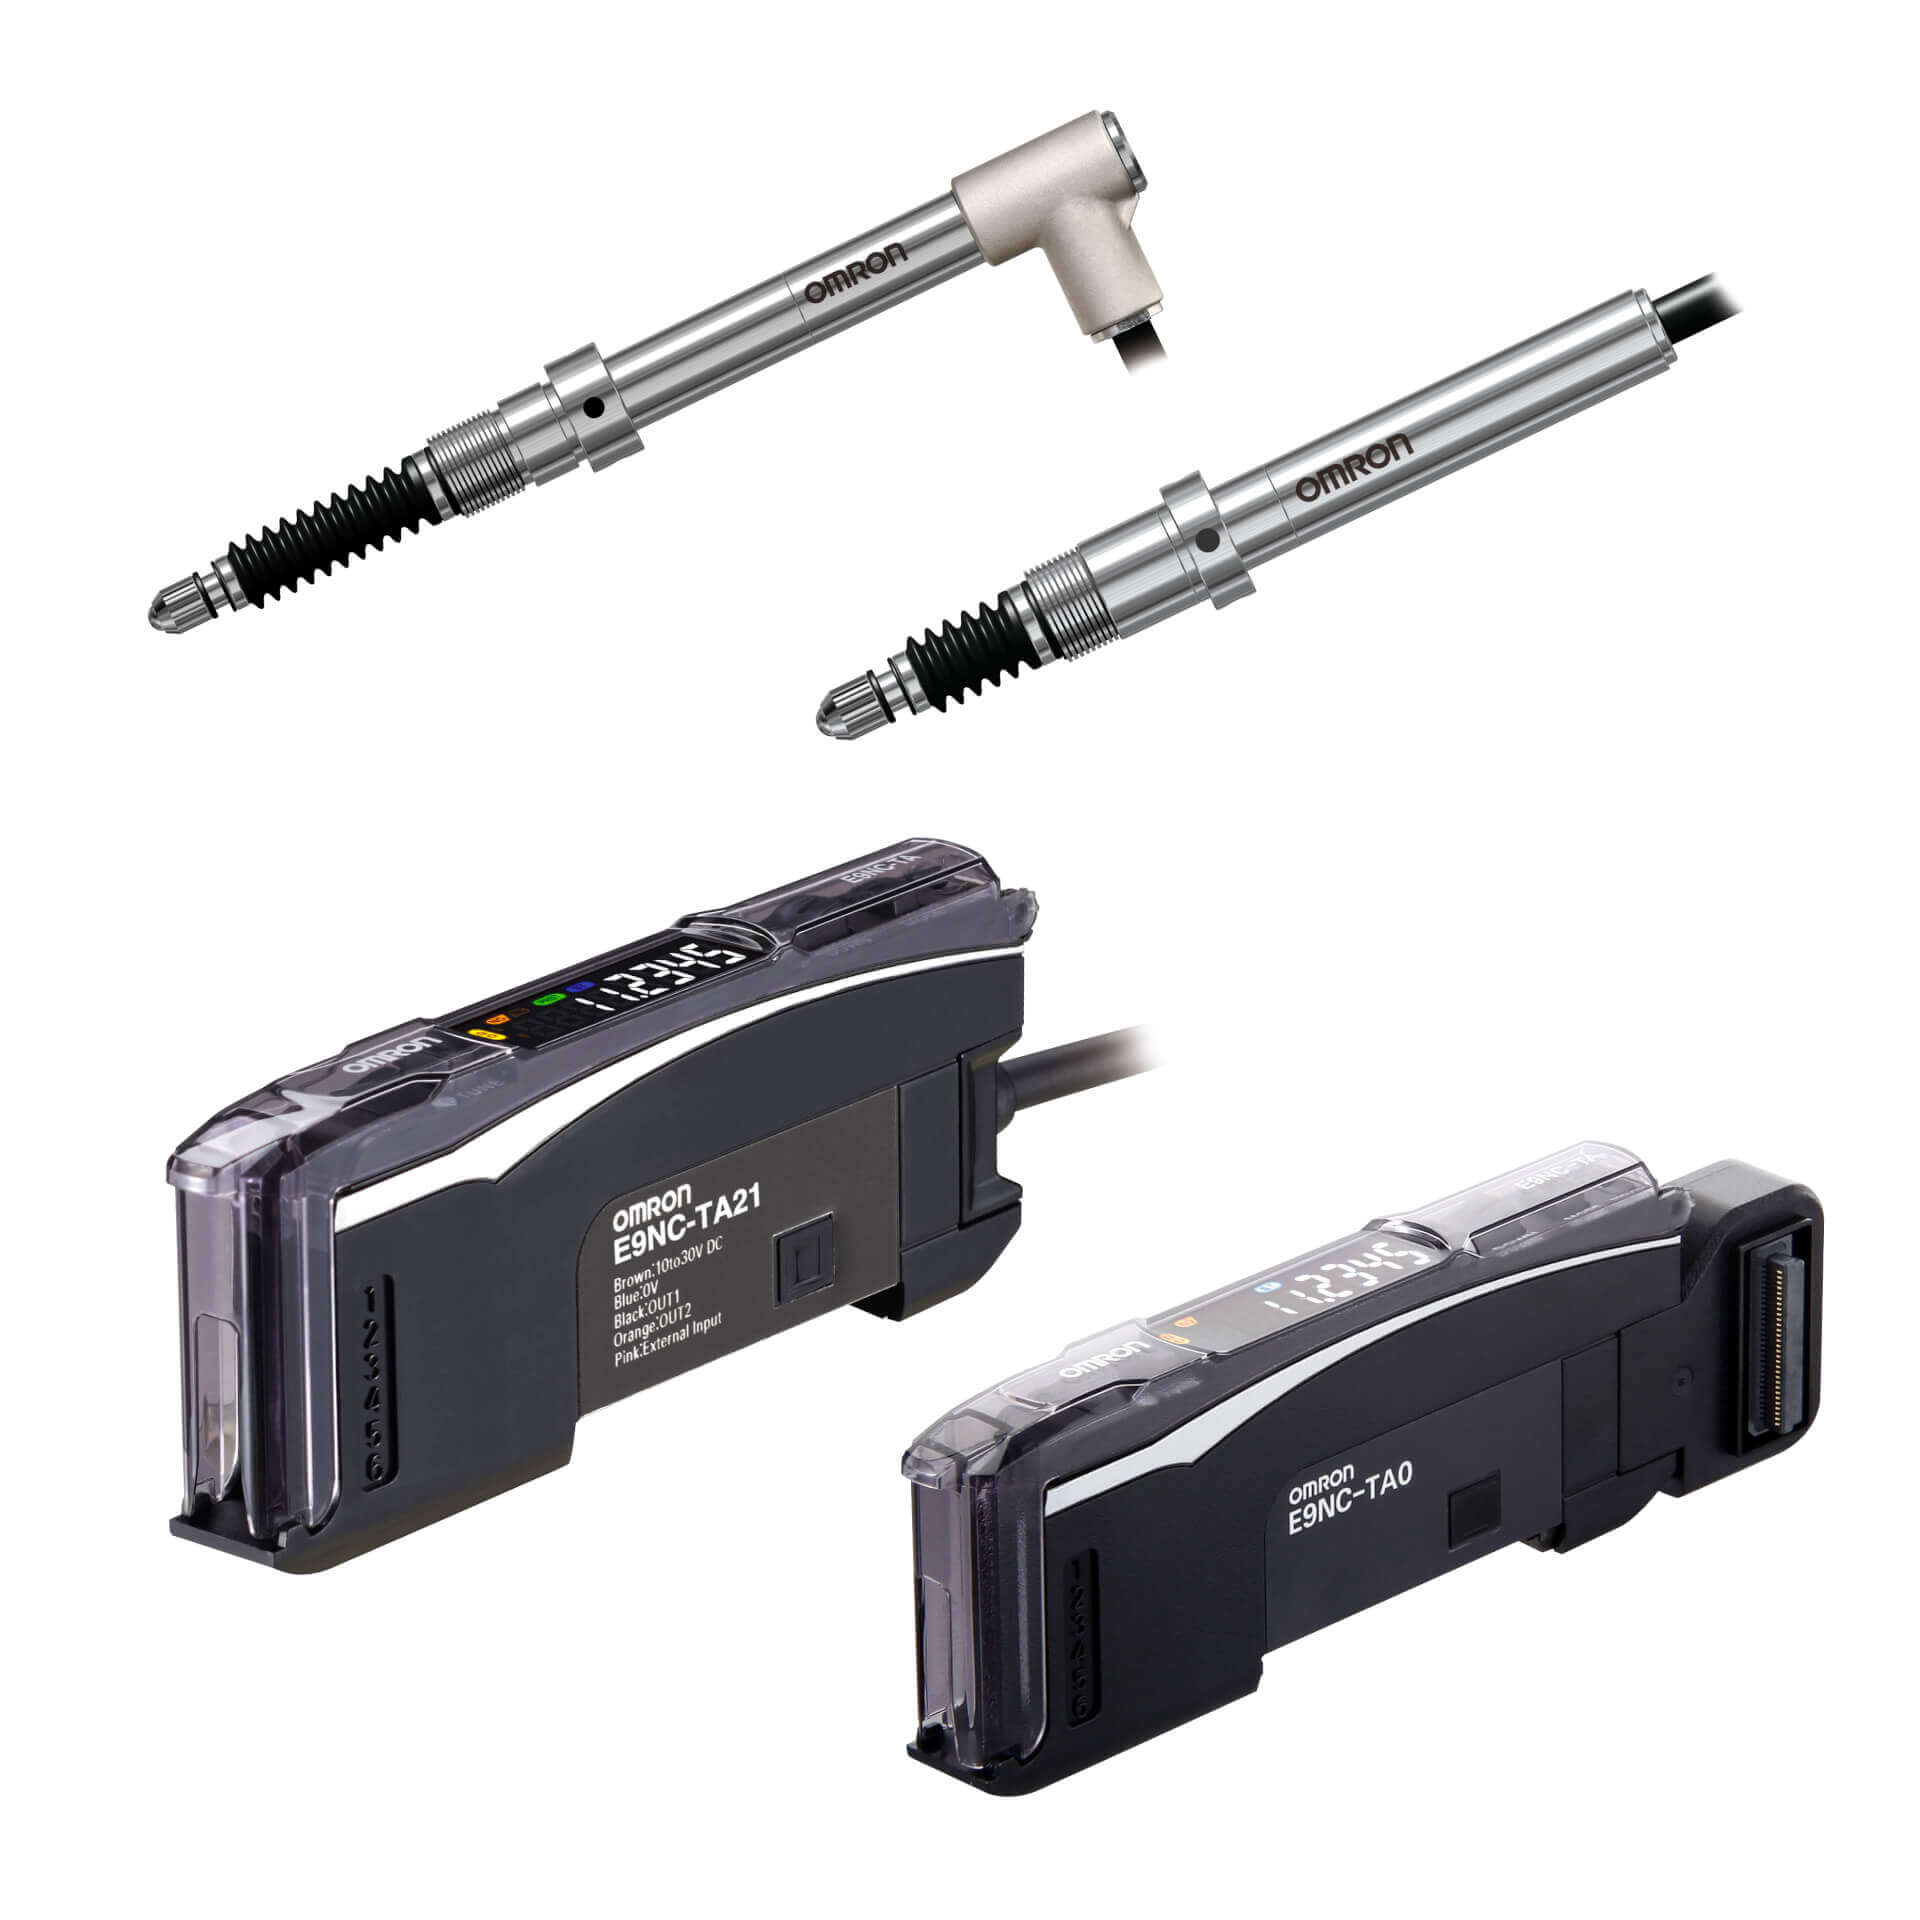 Contact Sensors detect objects and measure dimensions with a high accuracy of 1 μm. Their strength to withstand the sliding movement and their slim bodies are ideal for use in a wide variety of measurement applications.